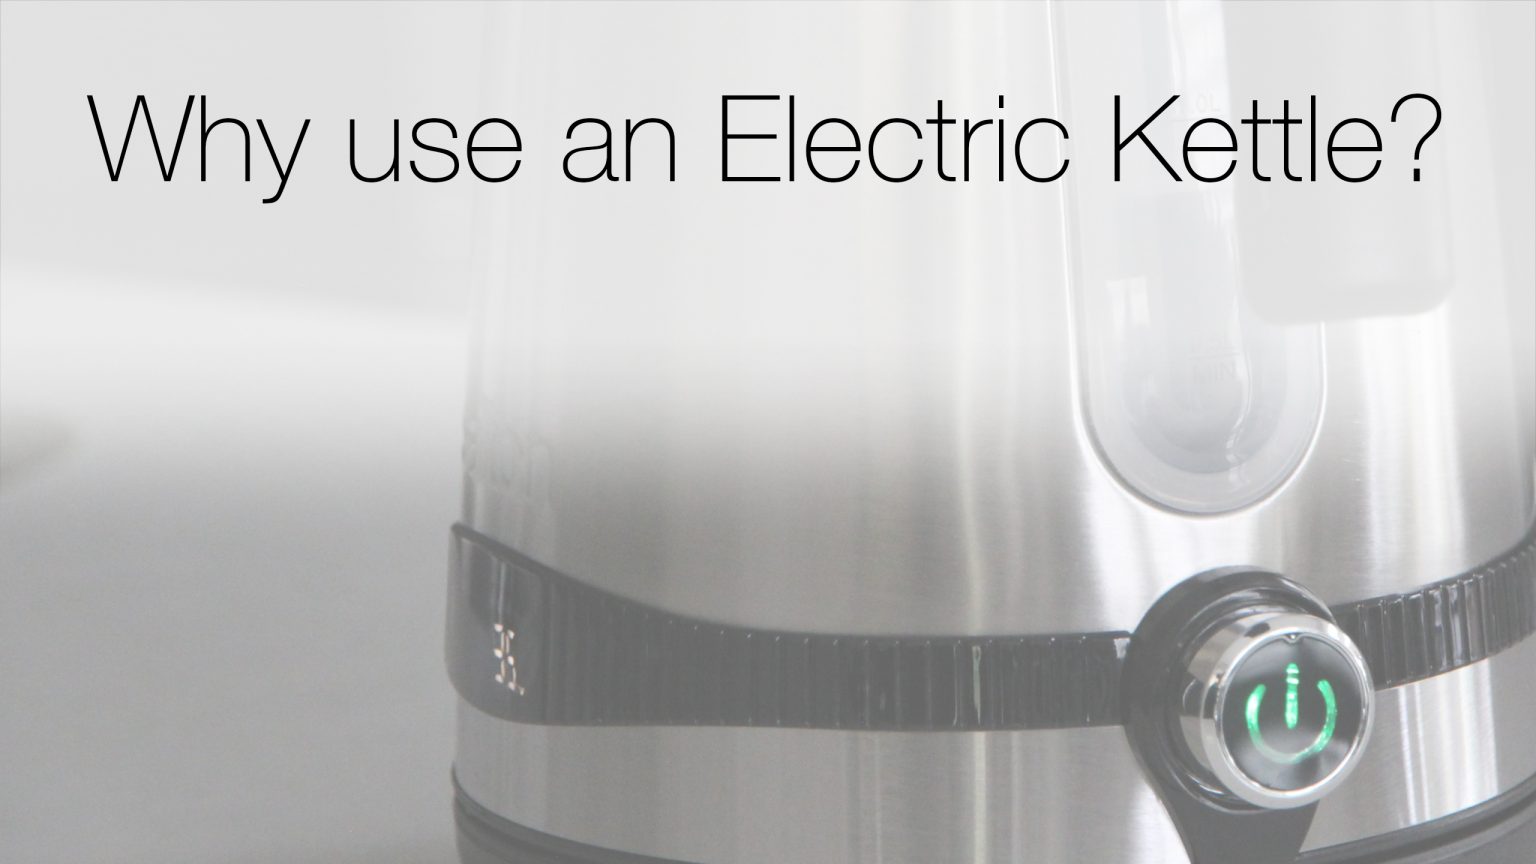 Why use an Electric Kettle?